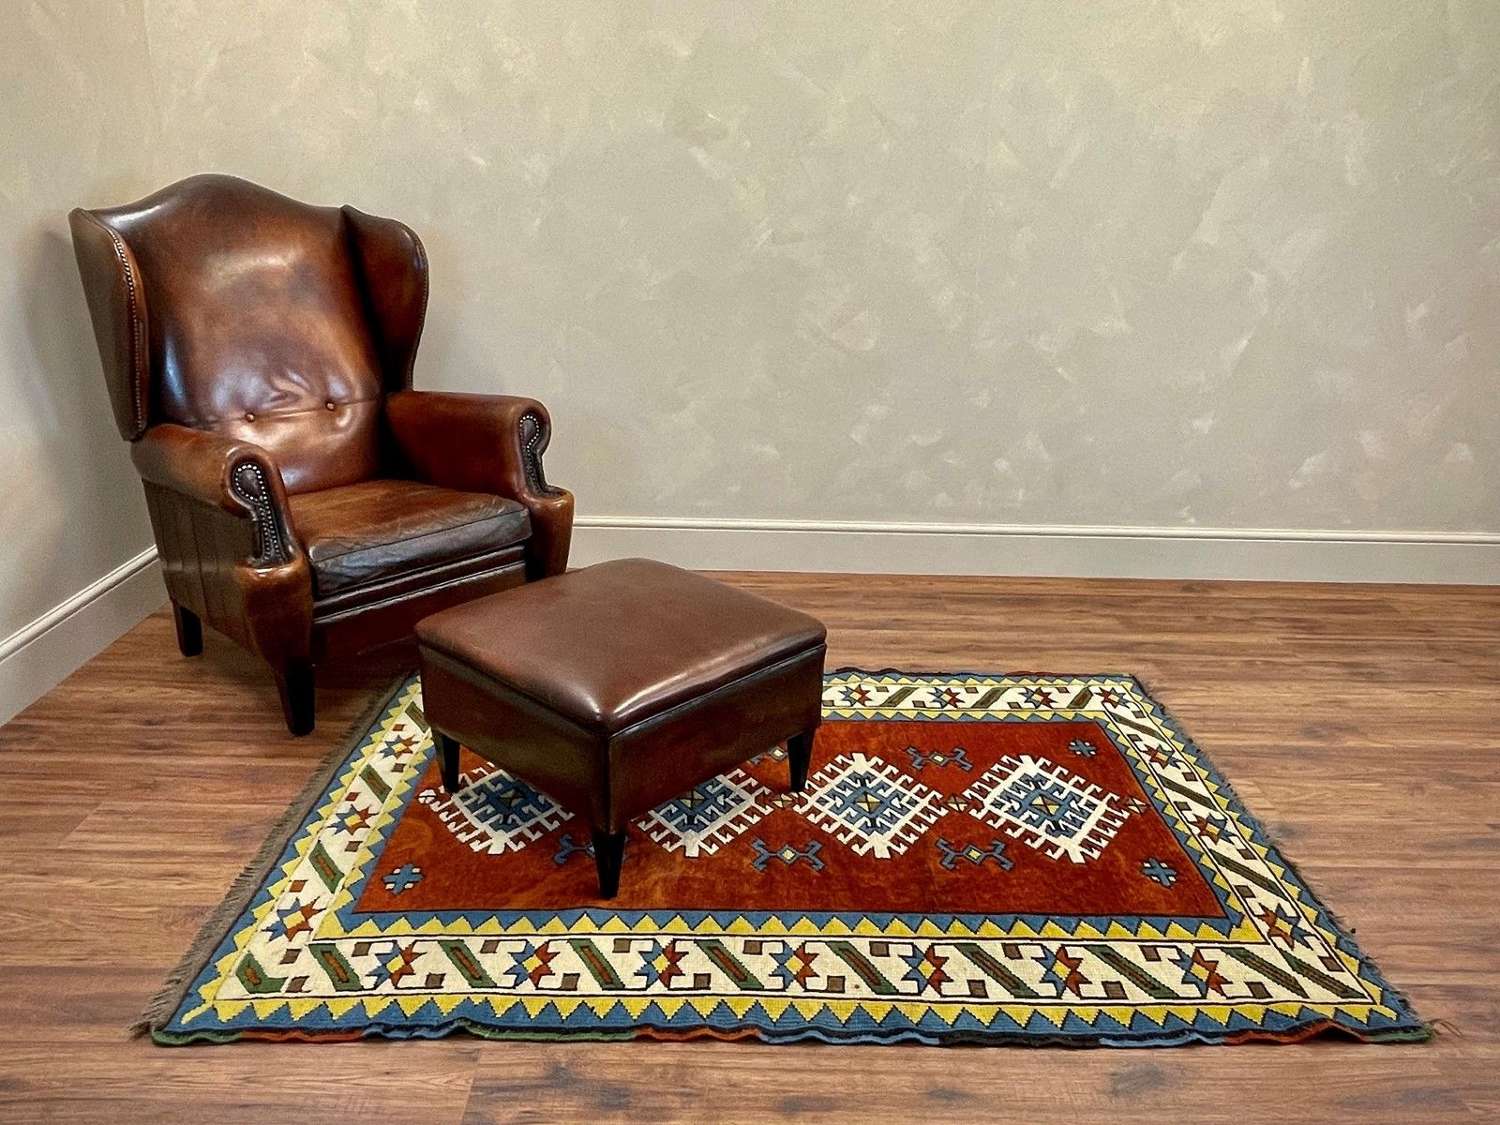 Dutch leather wingback chair and footstool